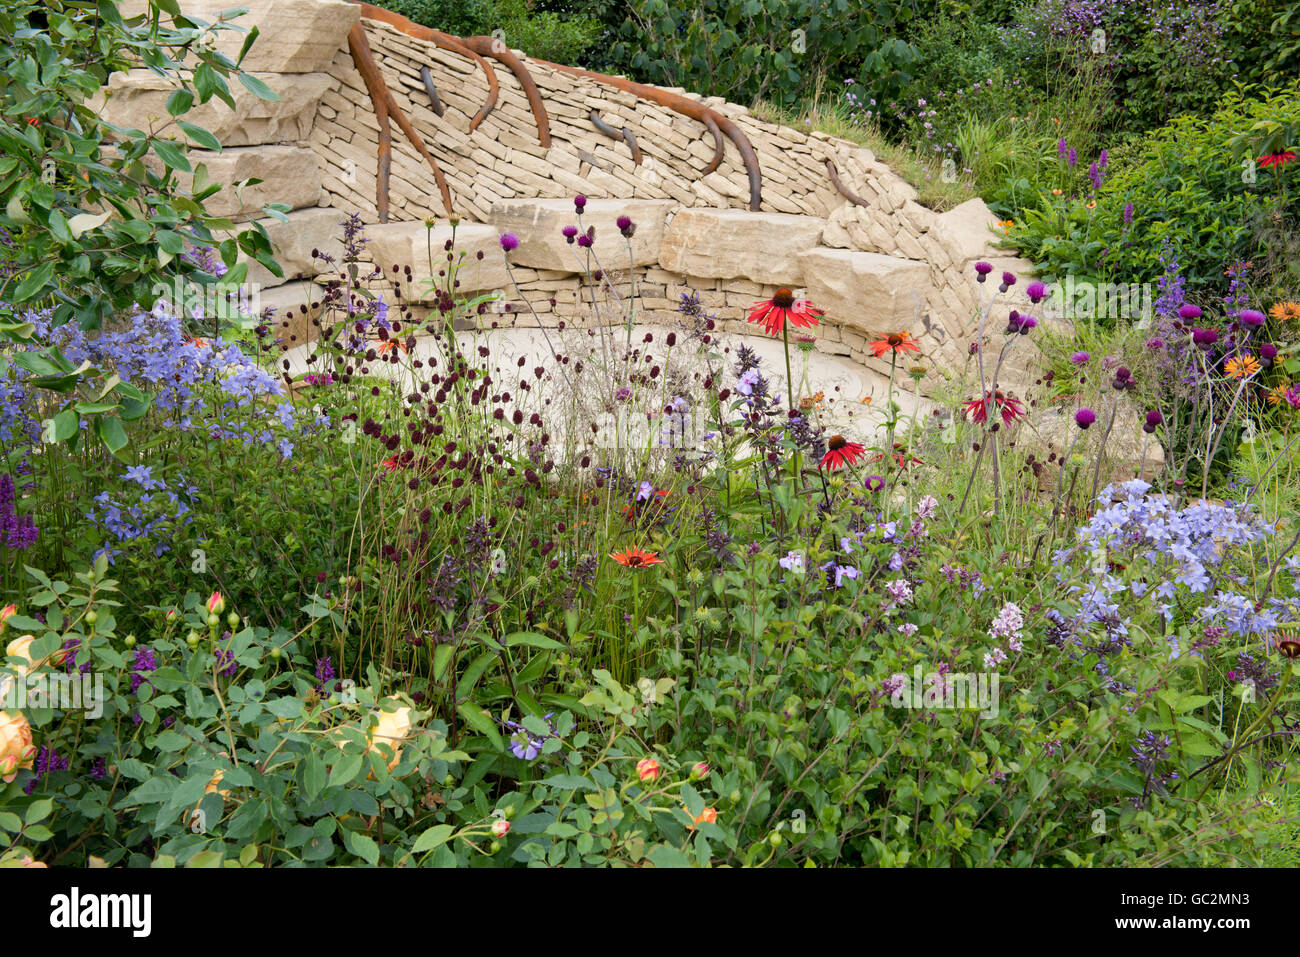 A stone seating area surrounded by naturalistic planting in The Zooflora: Outstanding Natural Beauty Garden. Stock Photo